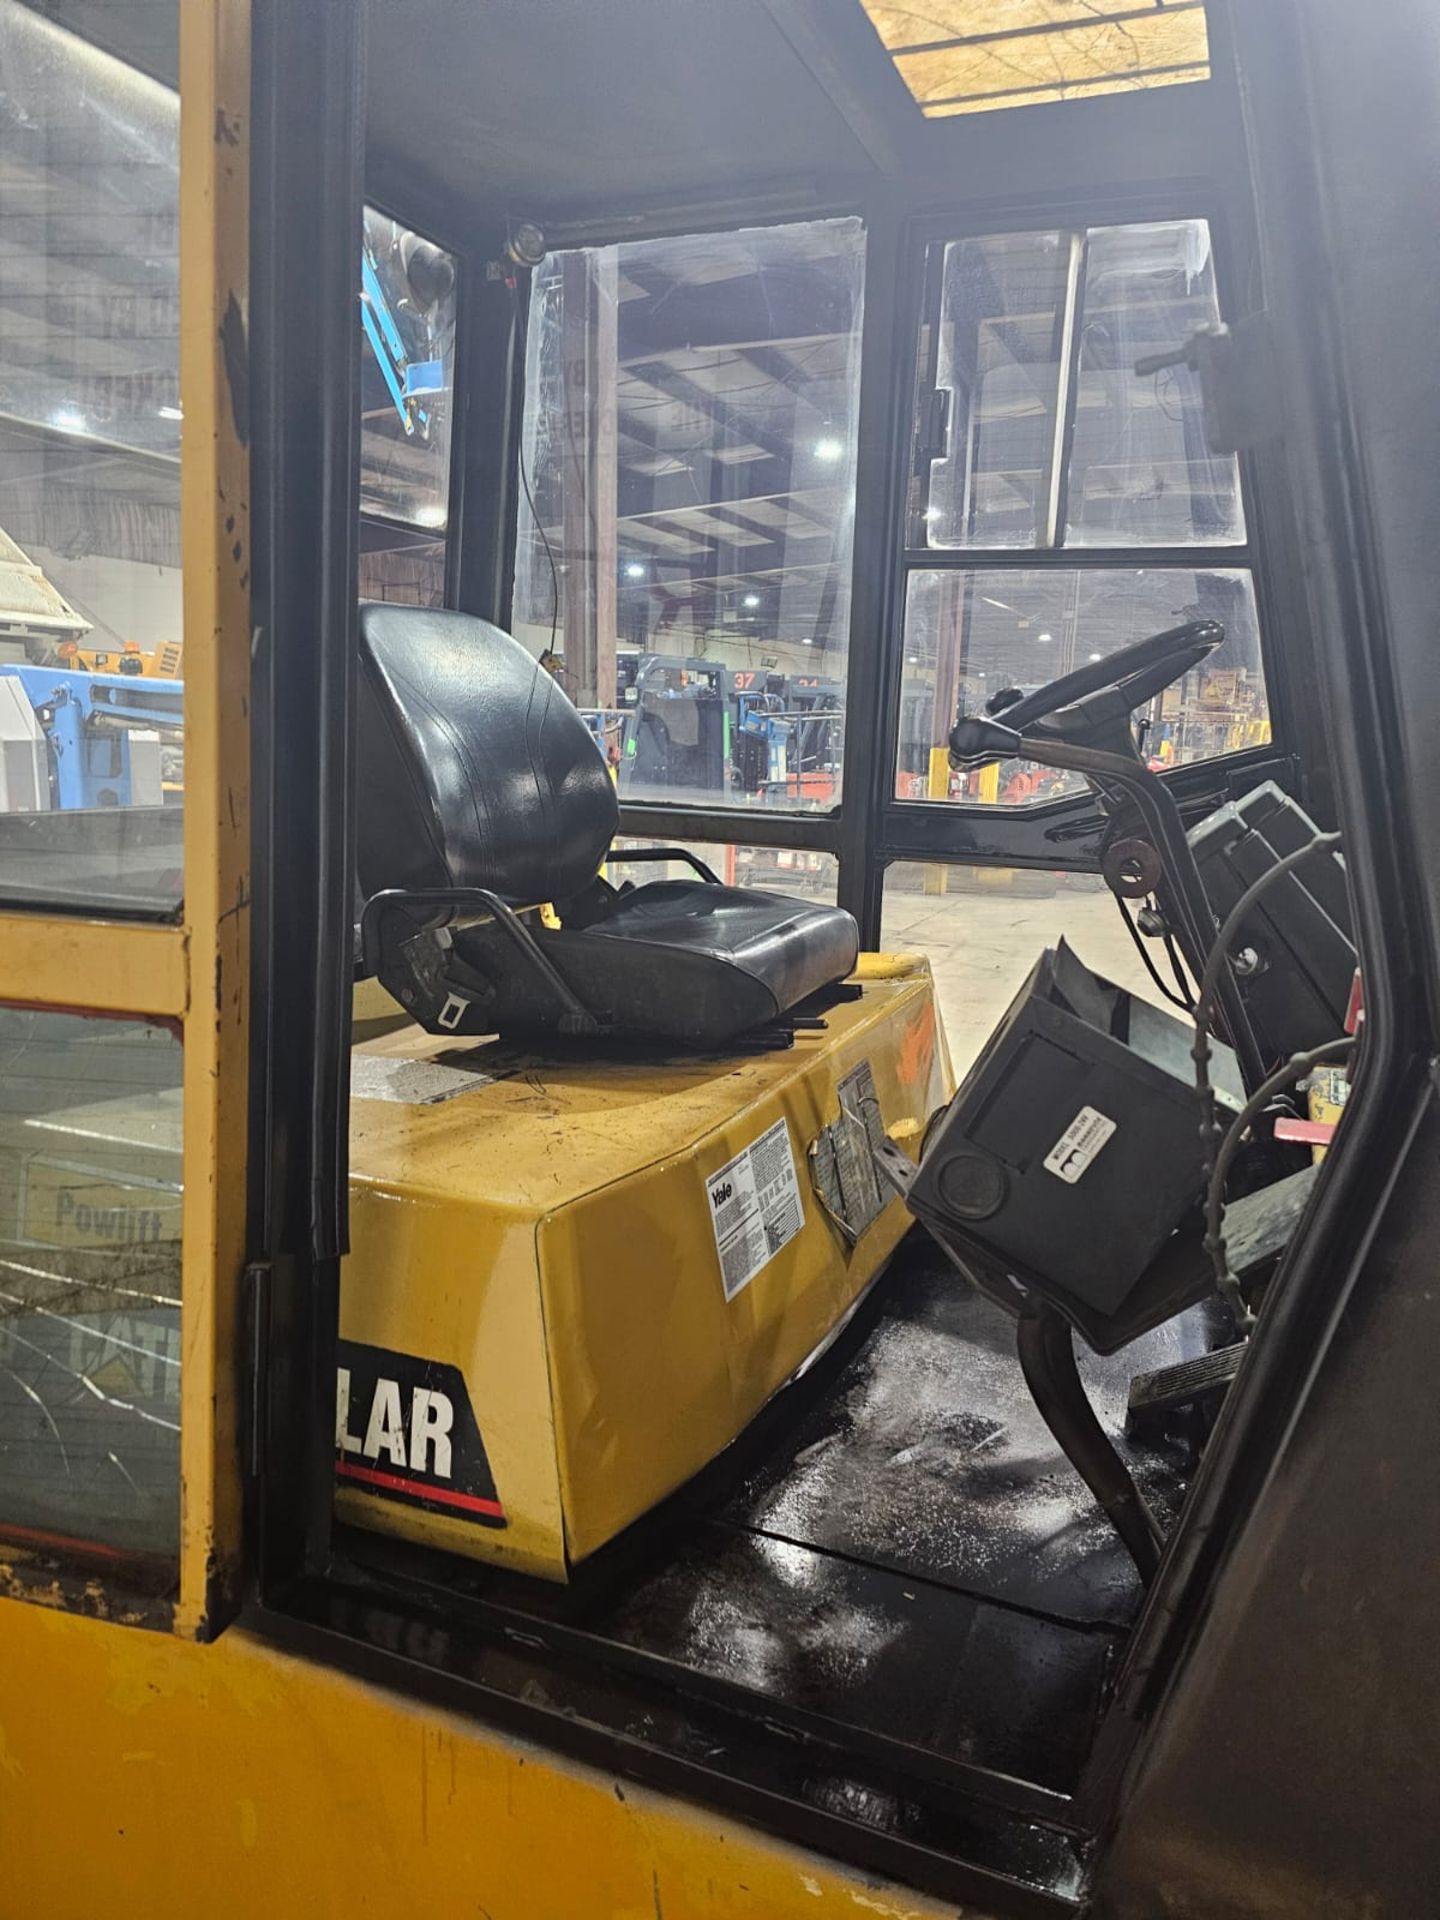 CATERPILLAR 20,000lbs Capacity LPG (Propane) OUTDOOR Forklift with 72" Forks & 146" load height with - Image 3 of 9